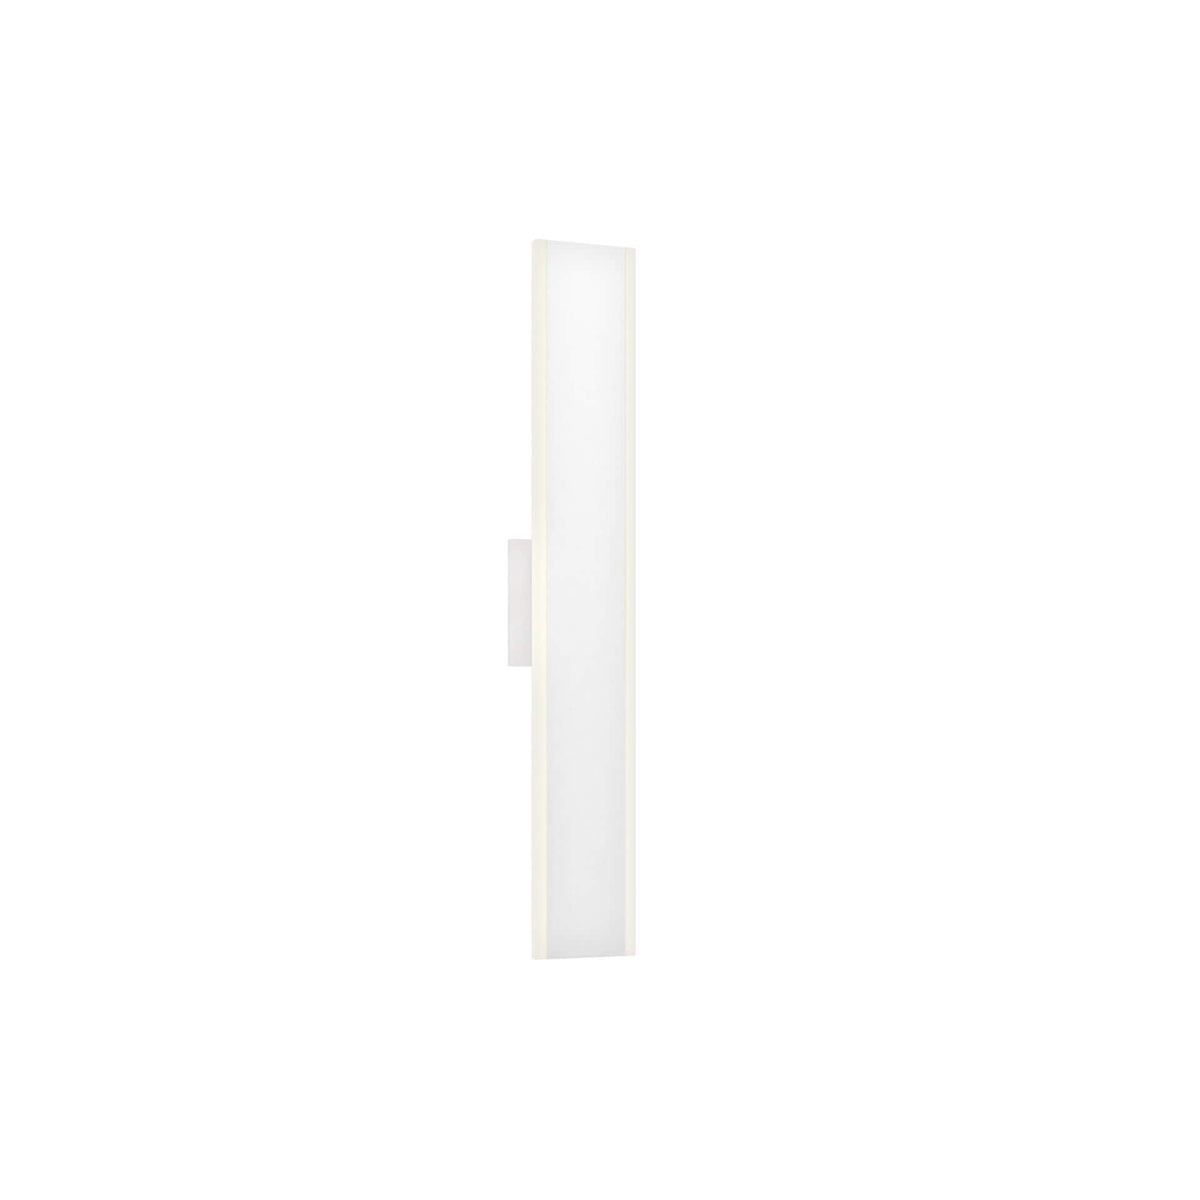 Dals Lighting - SWS LED Wall Sconce - SWS24-3K-WH | Montreal Lighting & Hardware